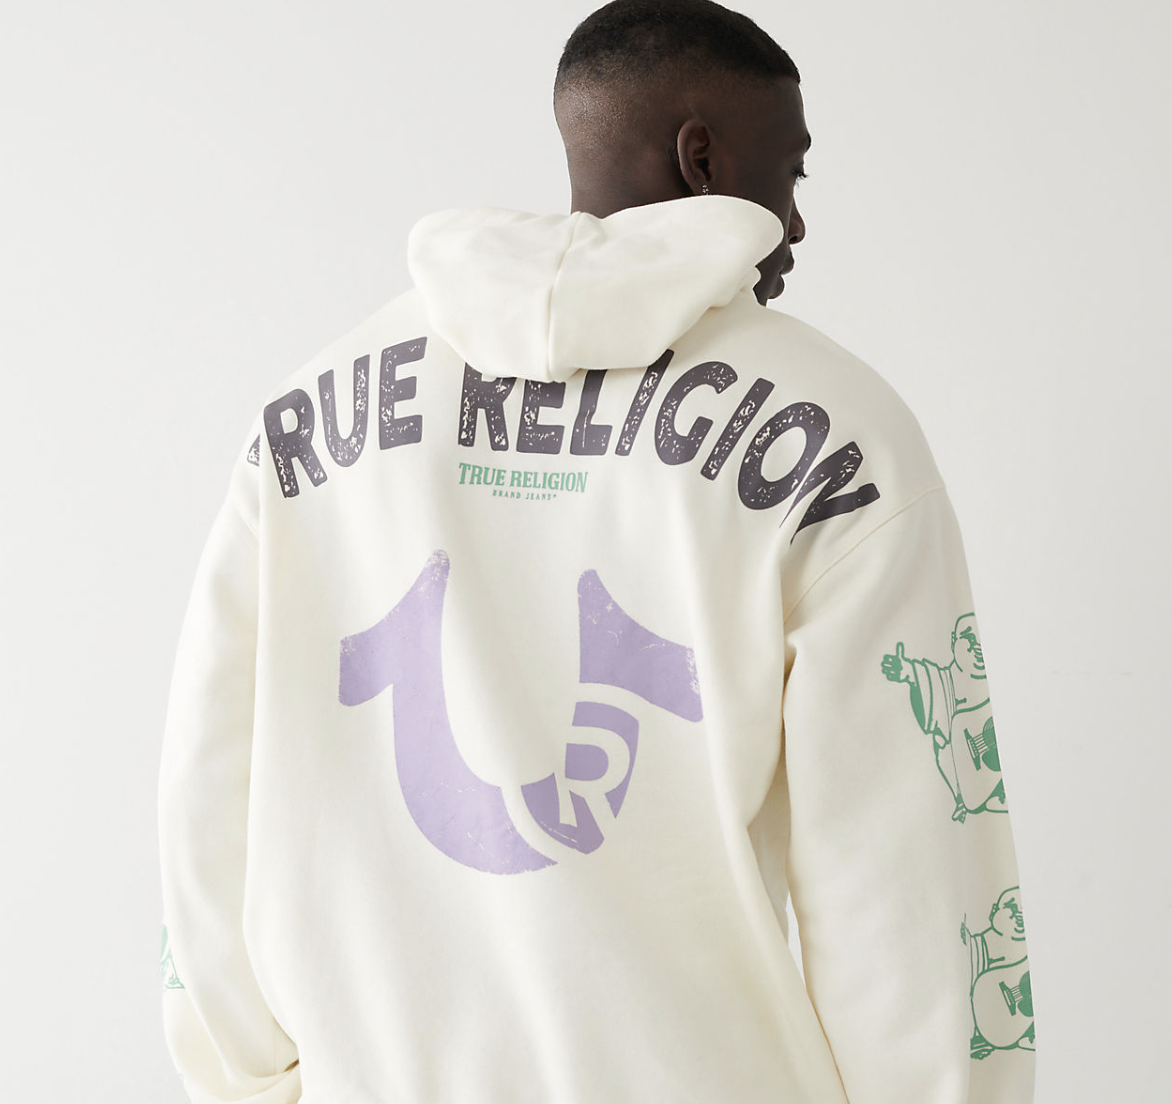 Score deals on hoodies and more with True Religion coupons